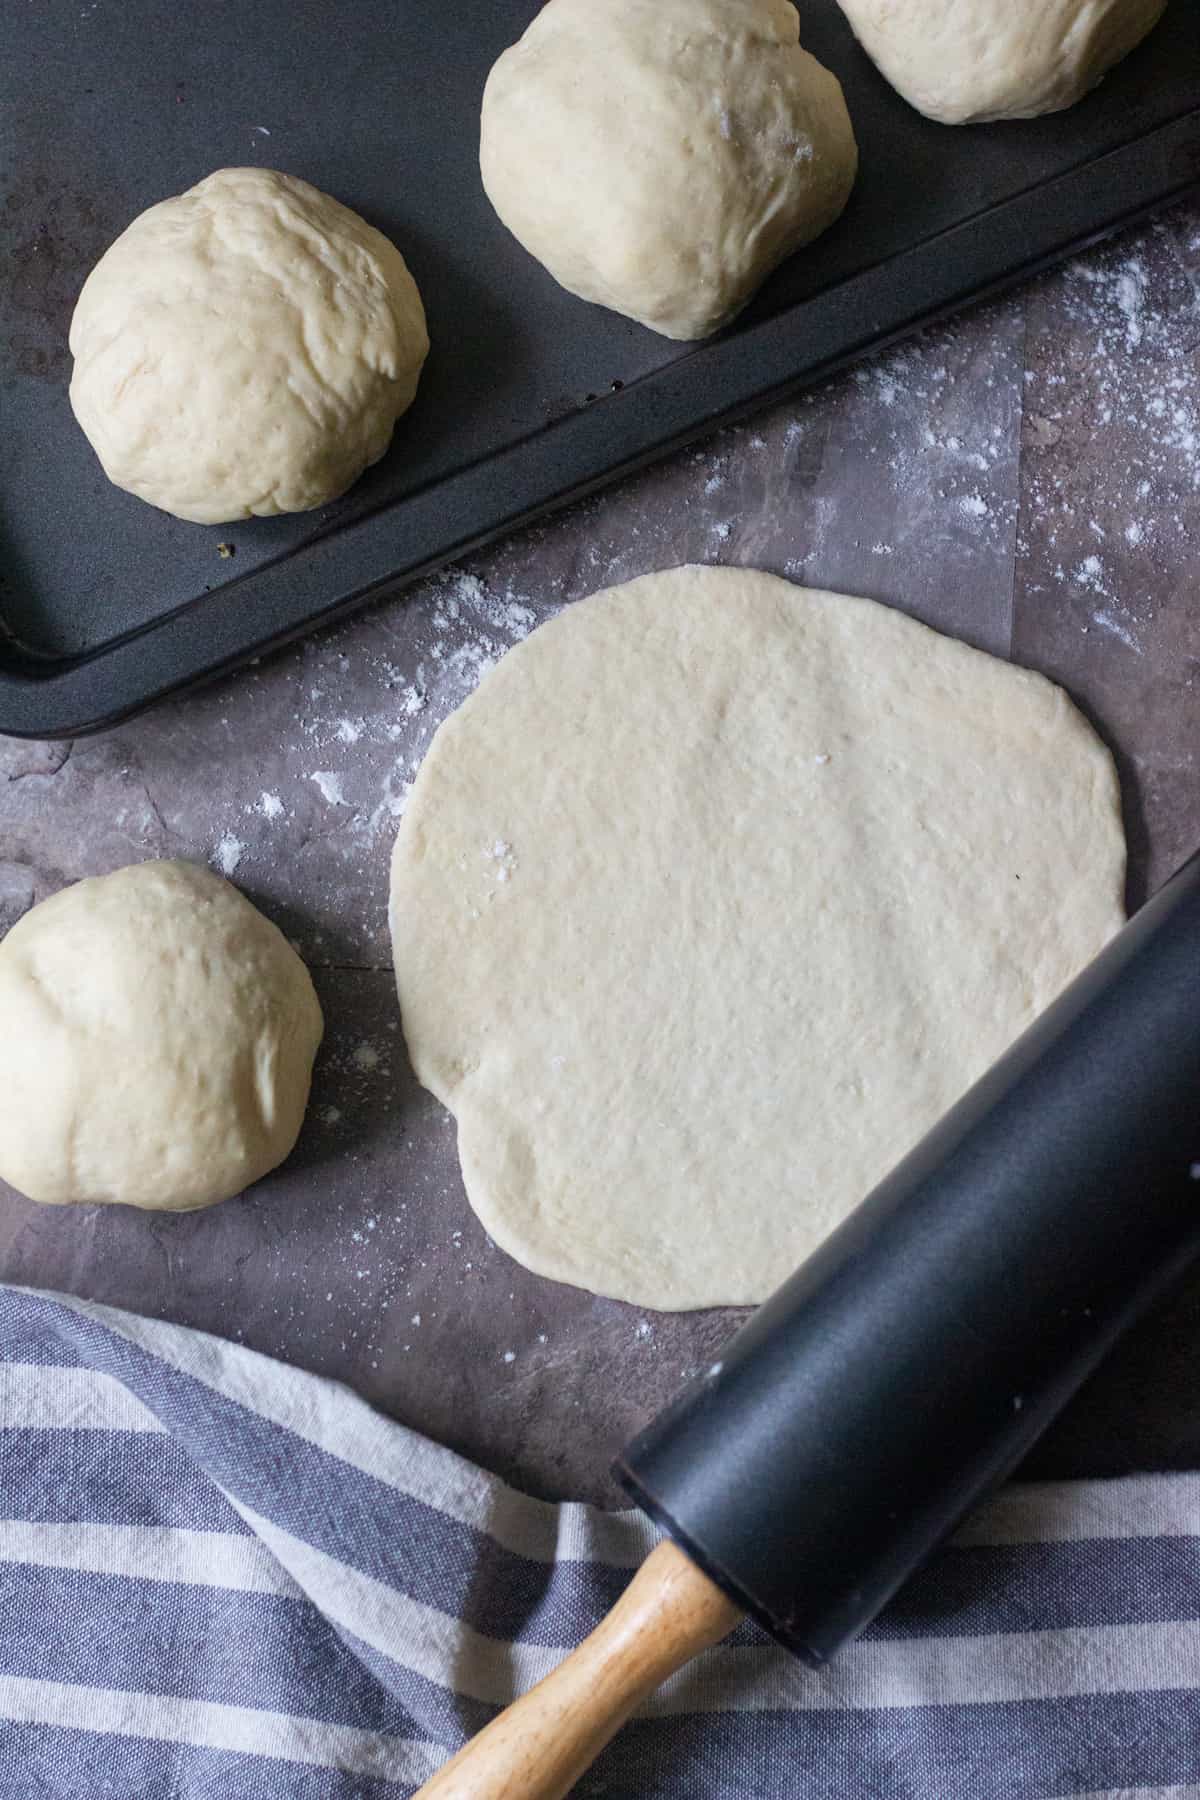 To make this recipe, roll the dough out so it's no thicker than ¼ inch.